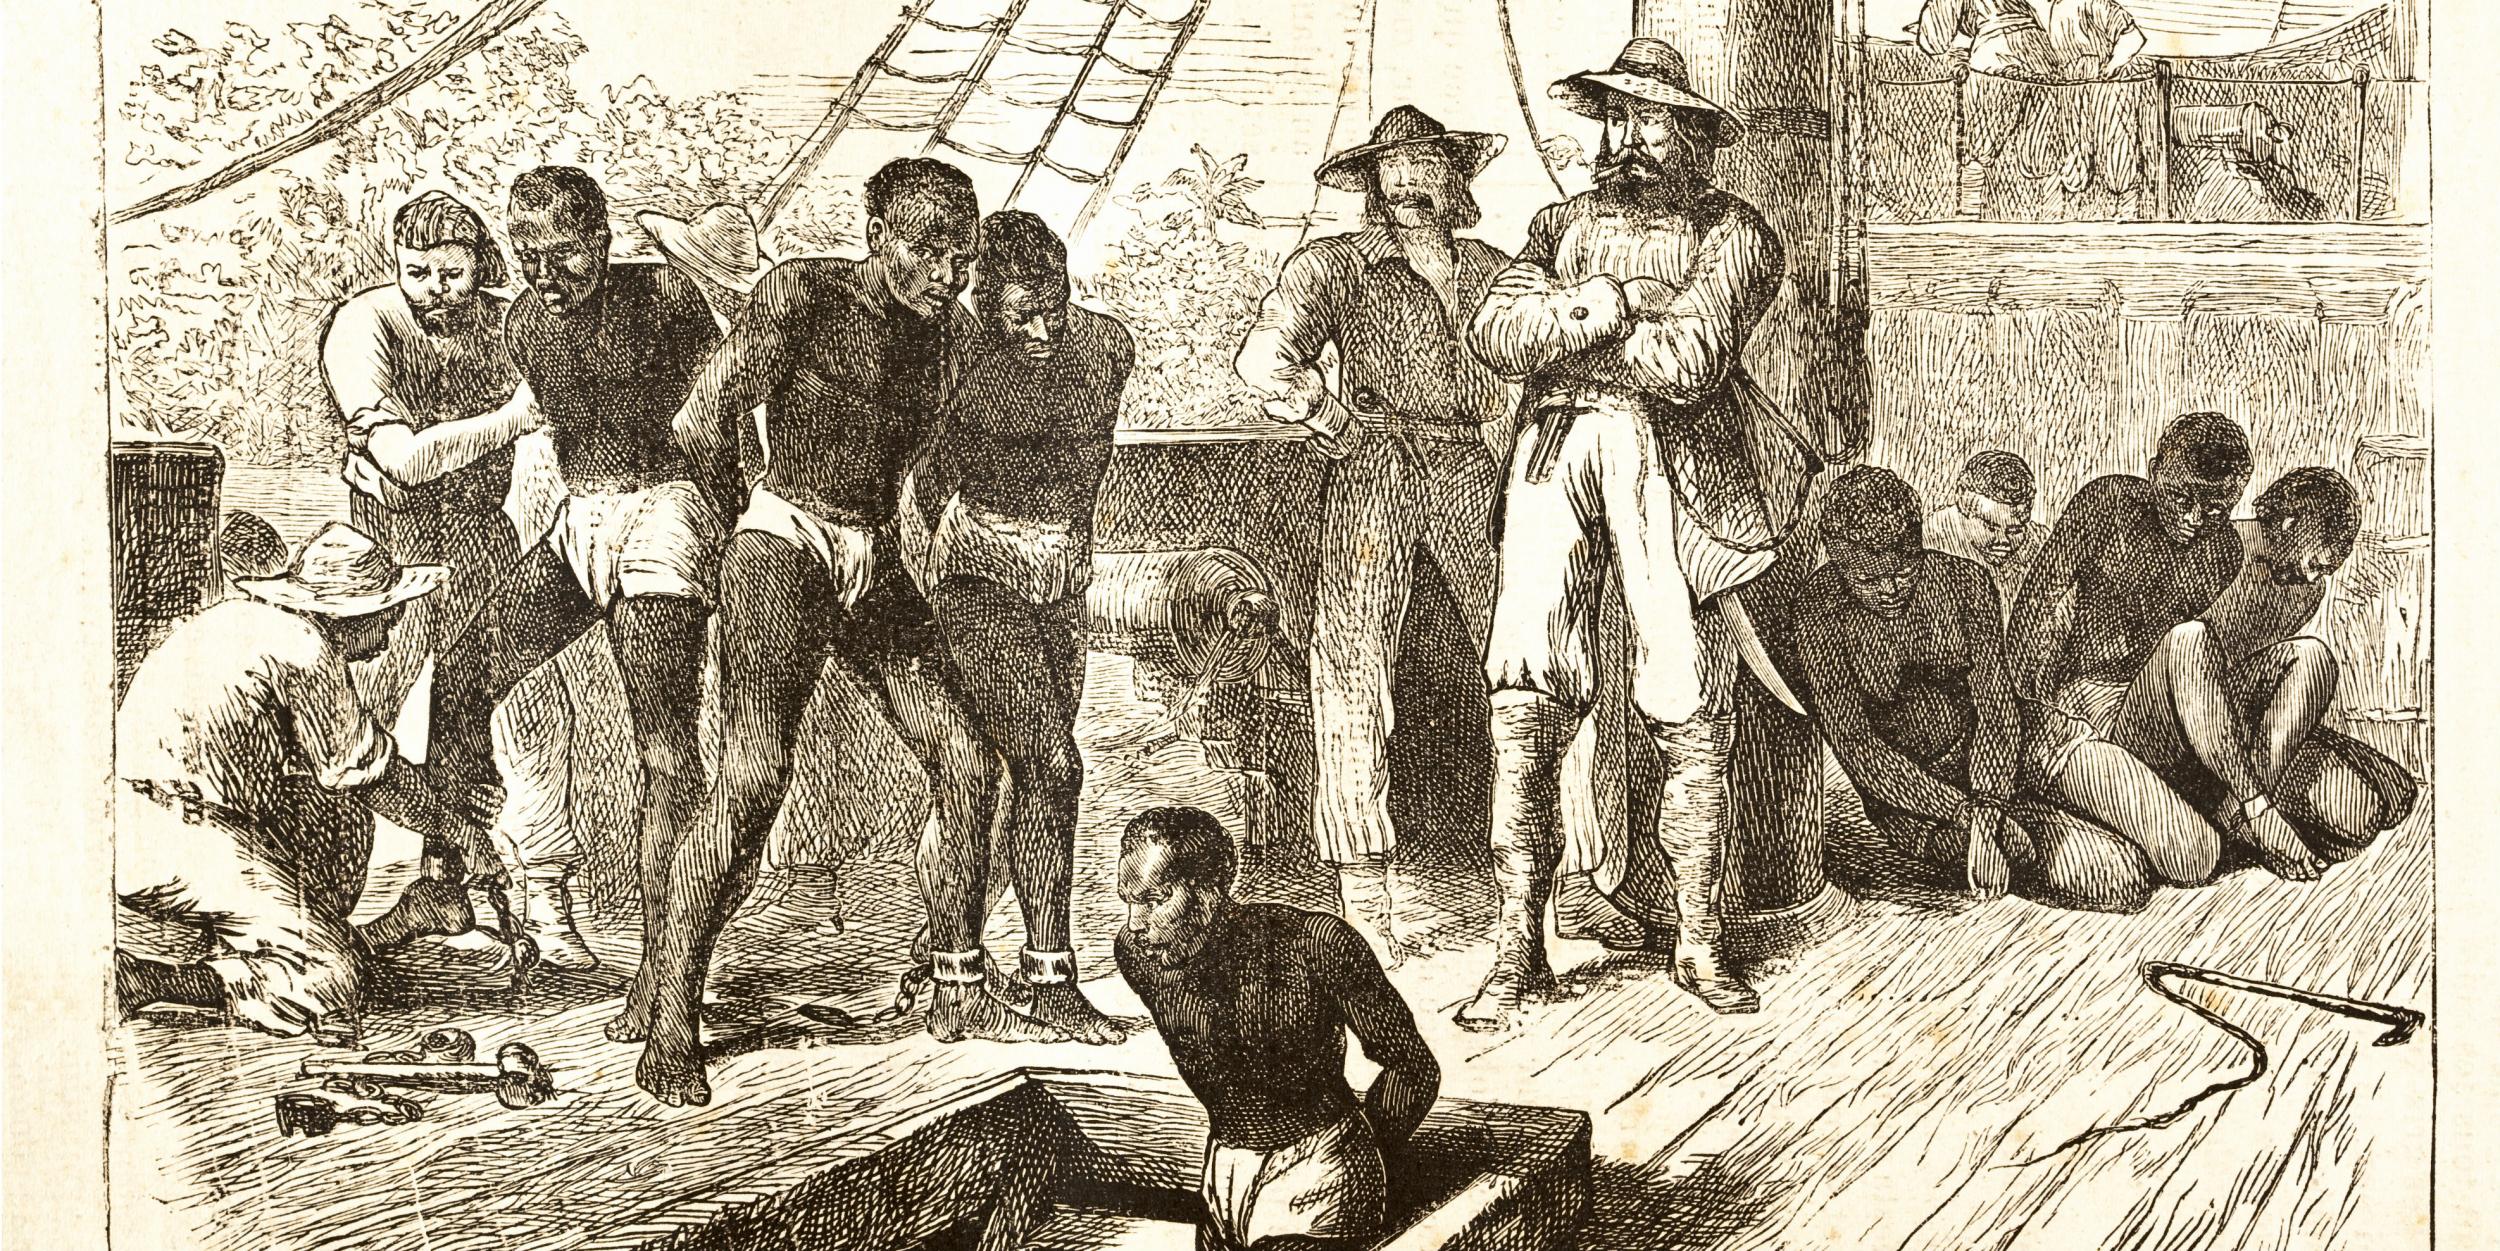 Significance Of Slavery And The Civil War